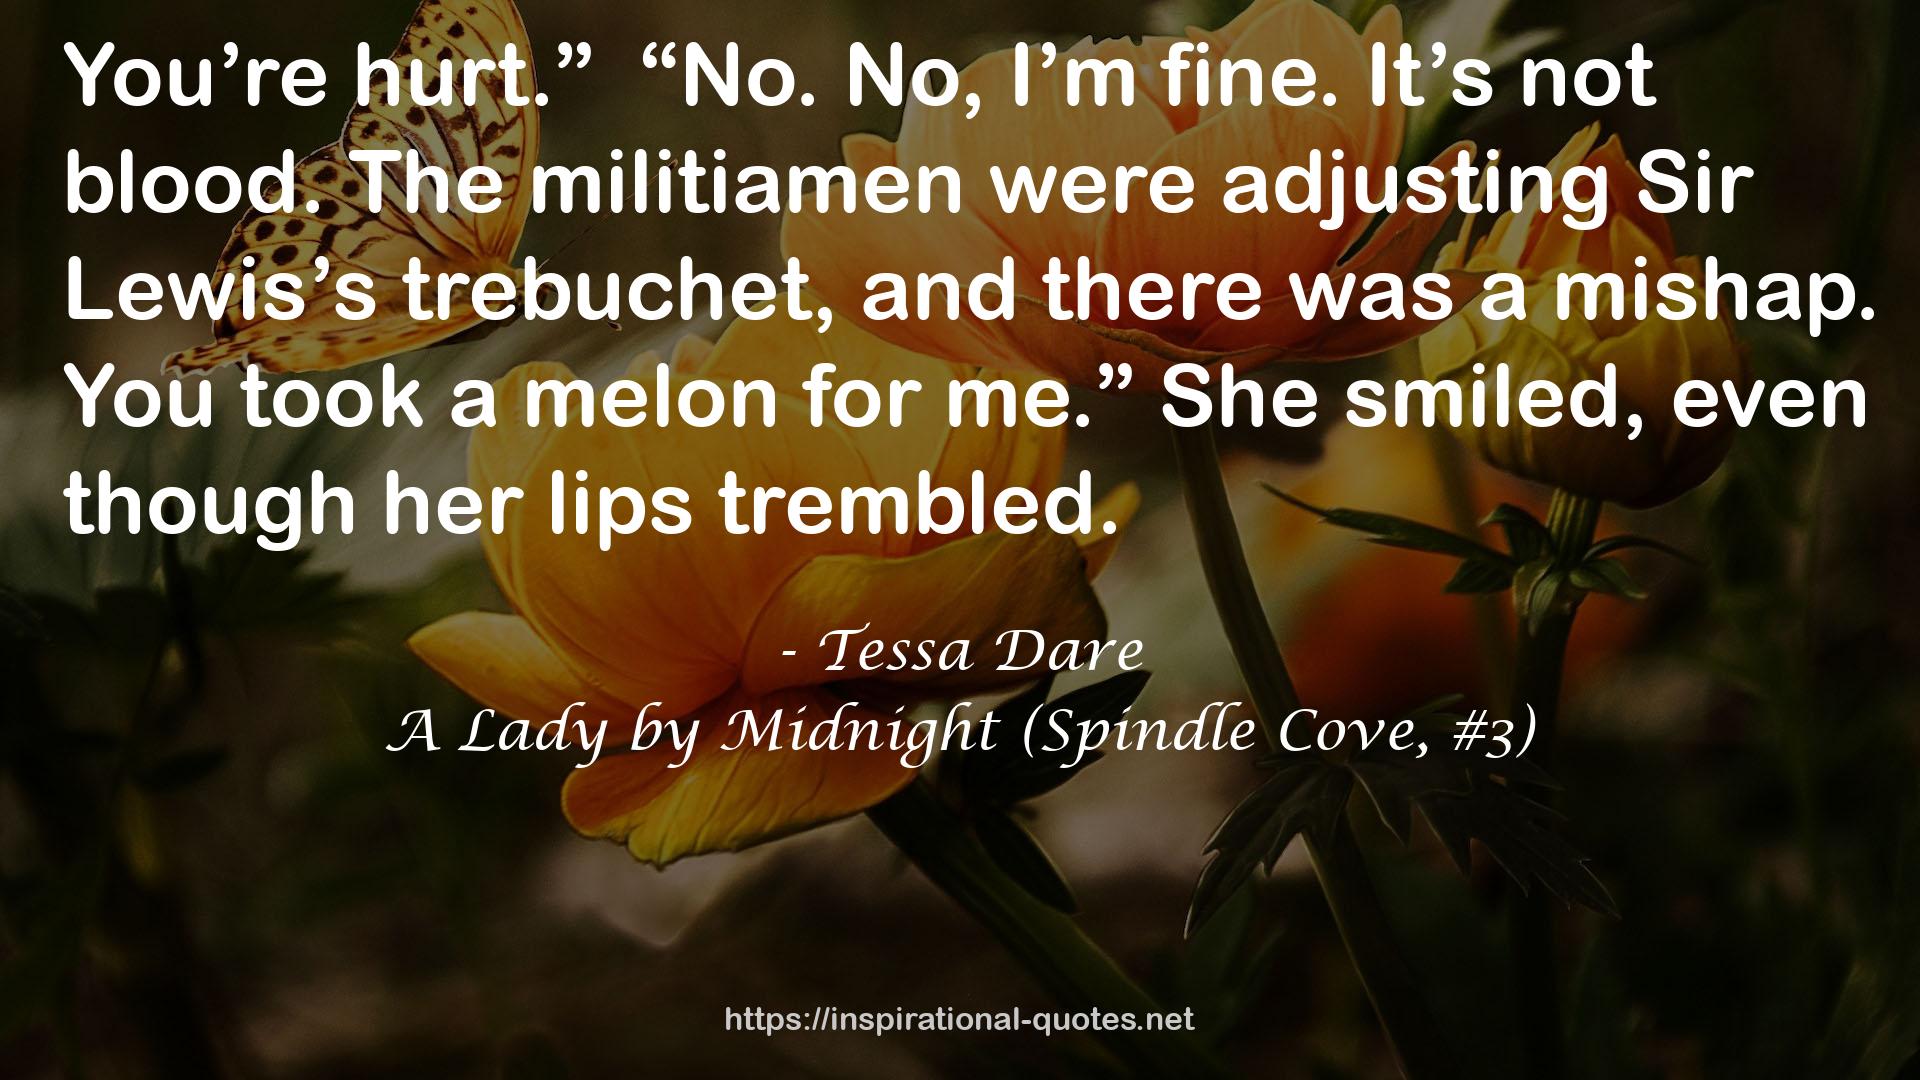 A Lady by Midnight (Spindle Cove, #3) QUOTES